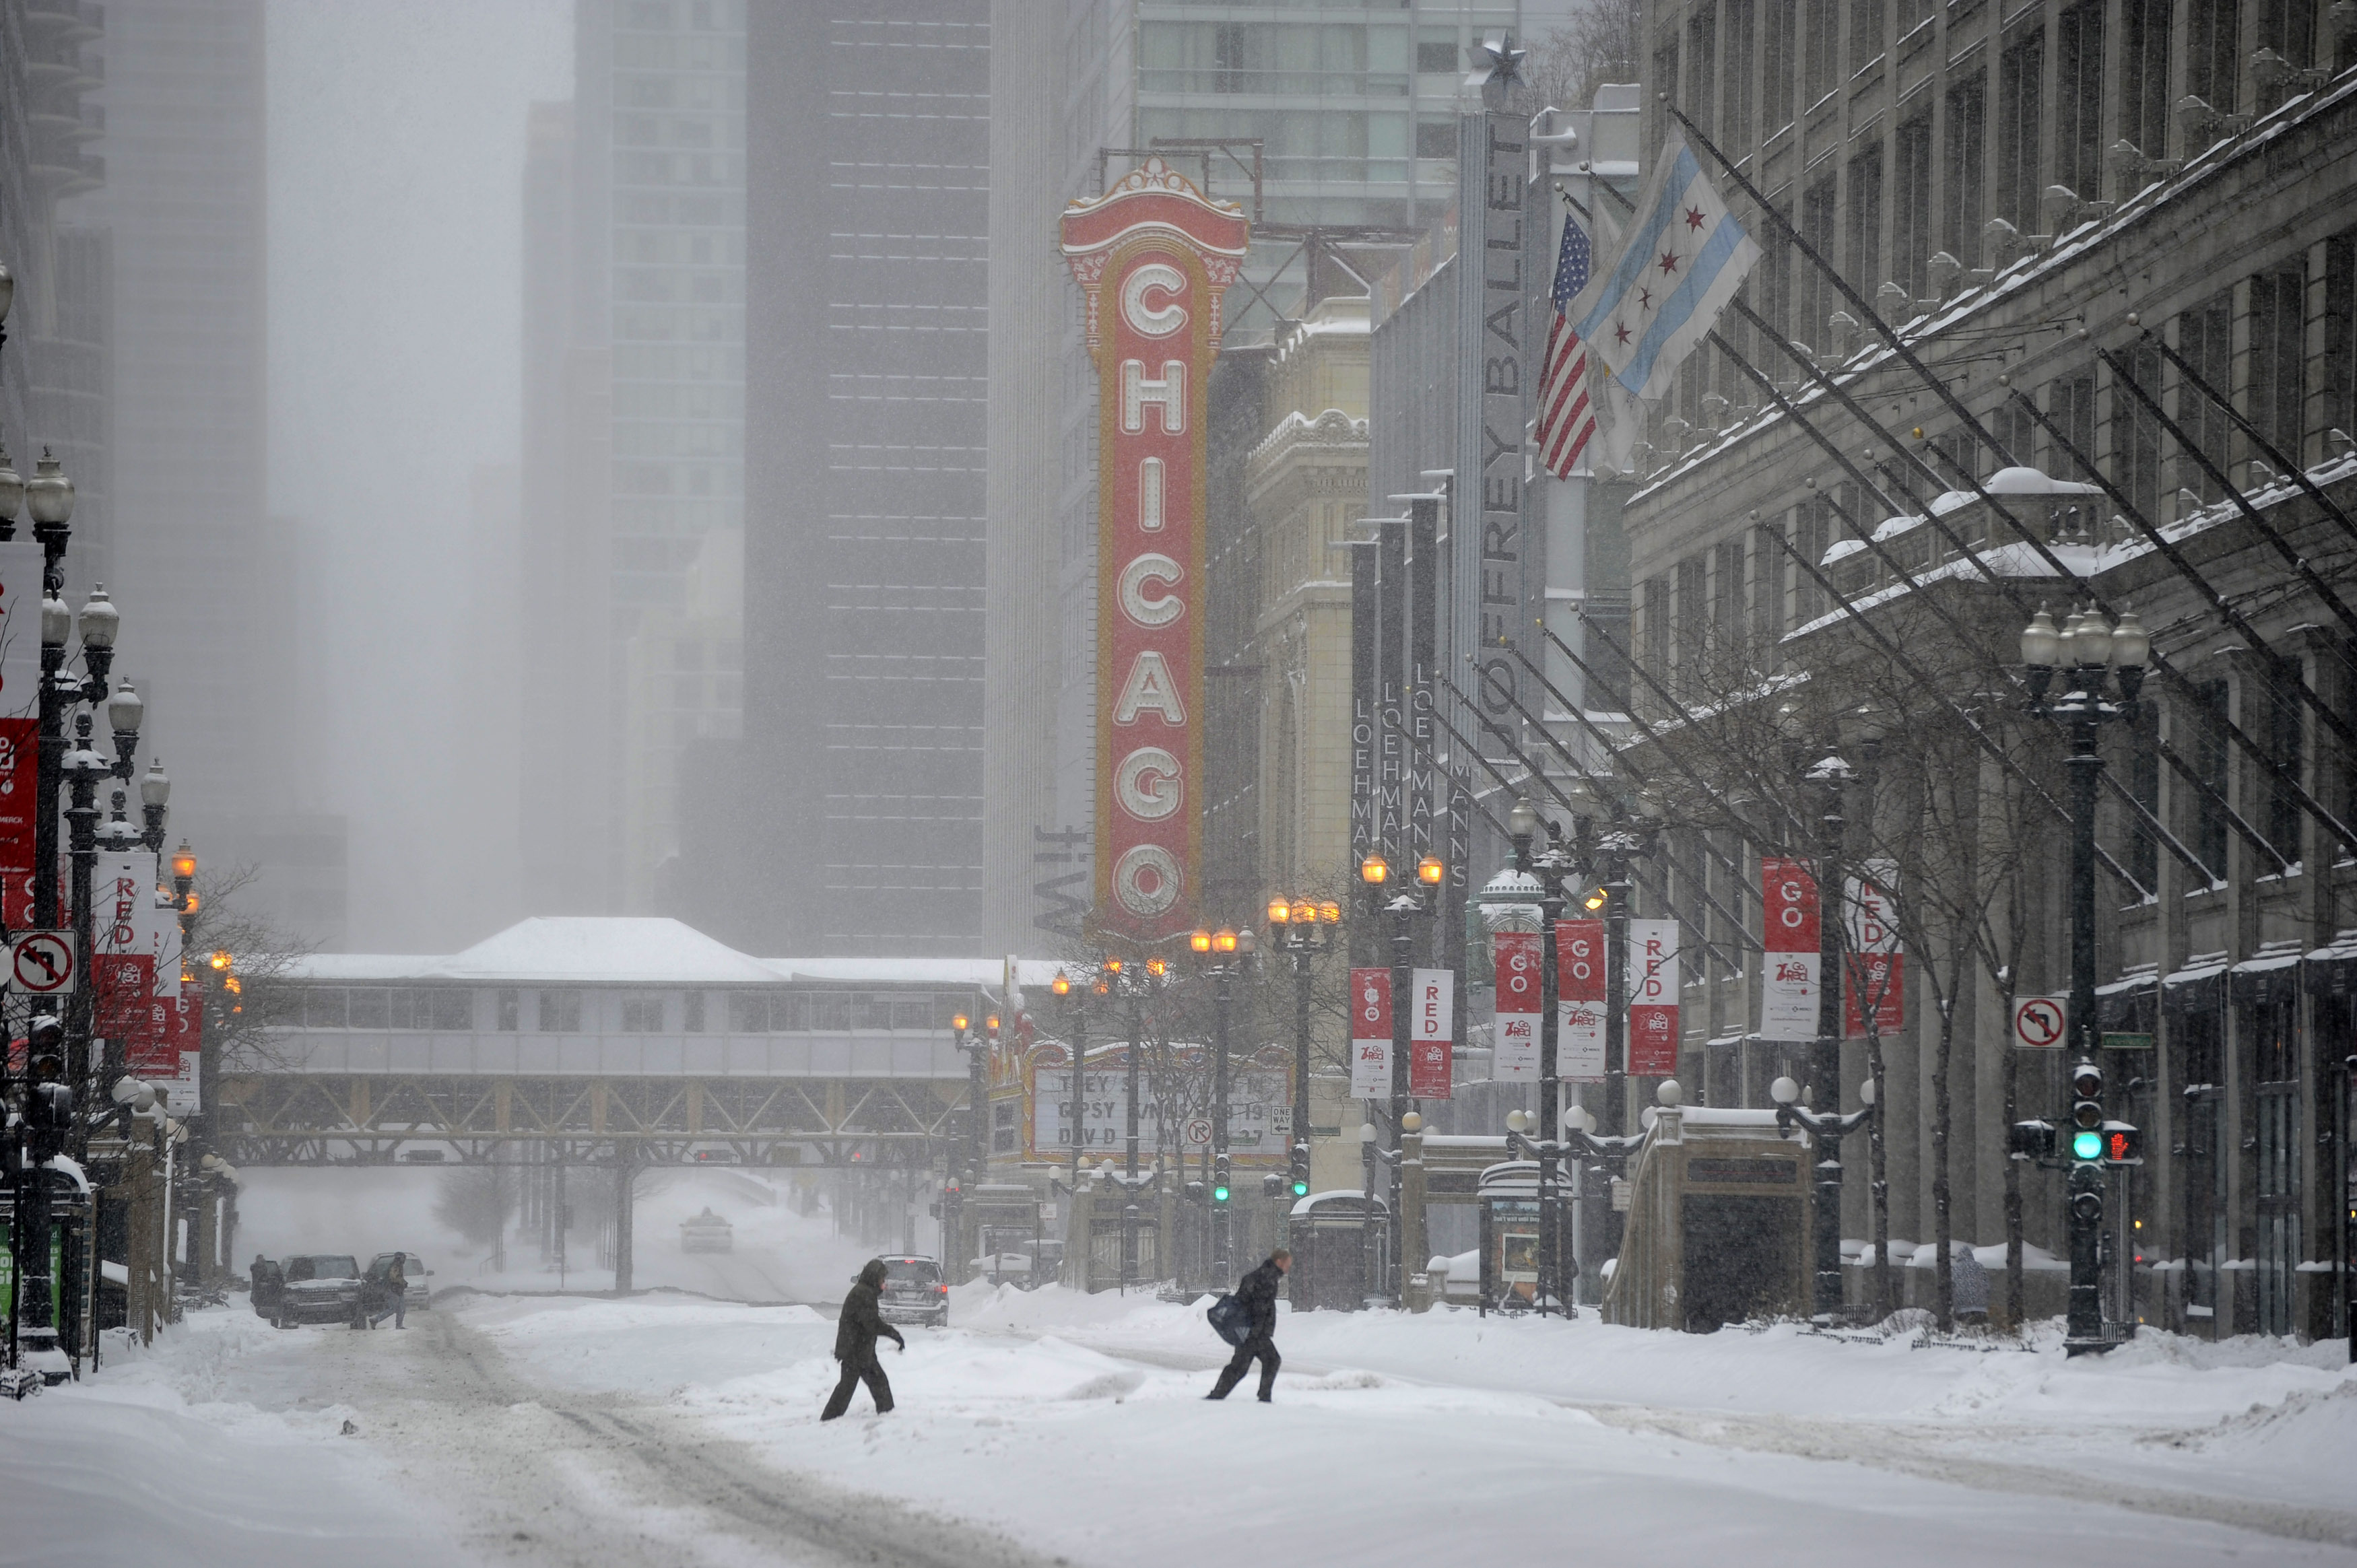 Snowy winter in Chicago wallpapers and images - wallpapers ...